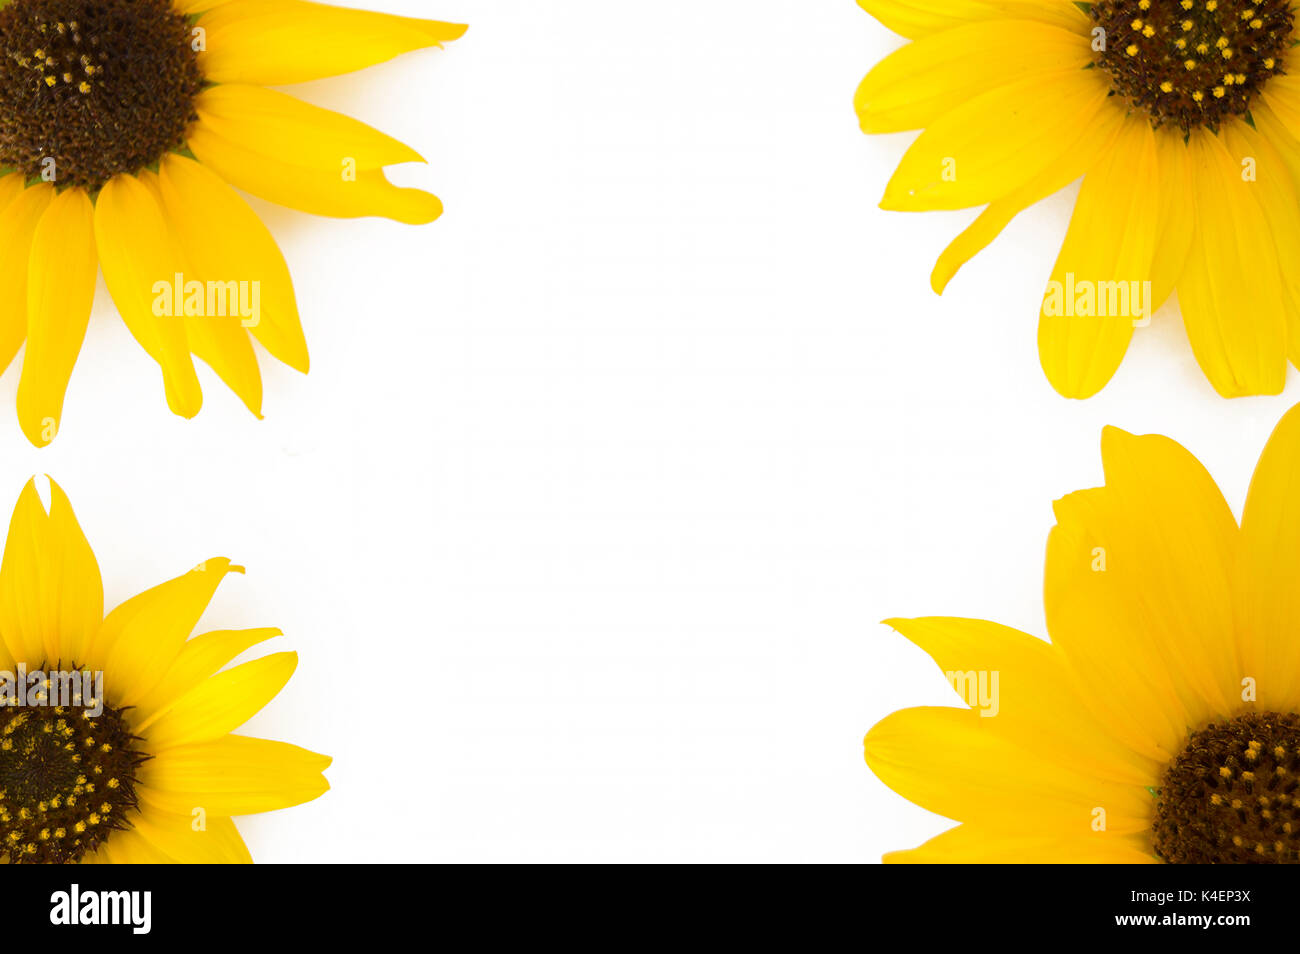 Four sunflowers heads coming from four corners on a white background. Stock Photo